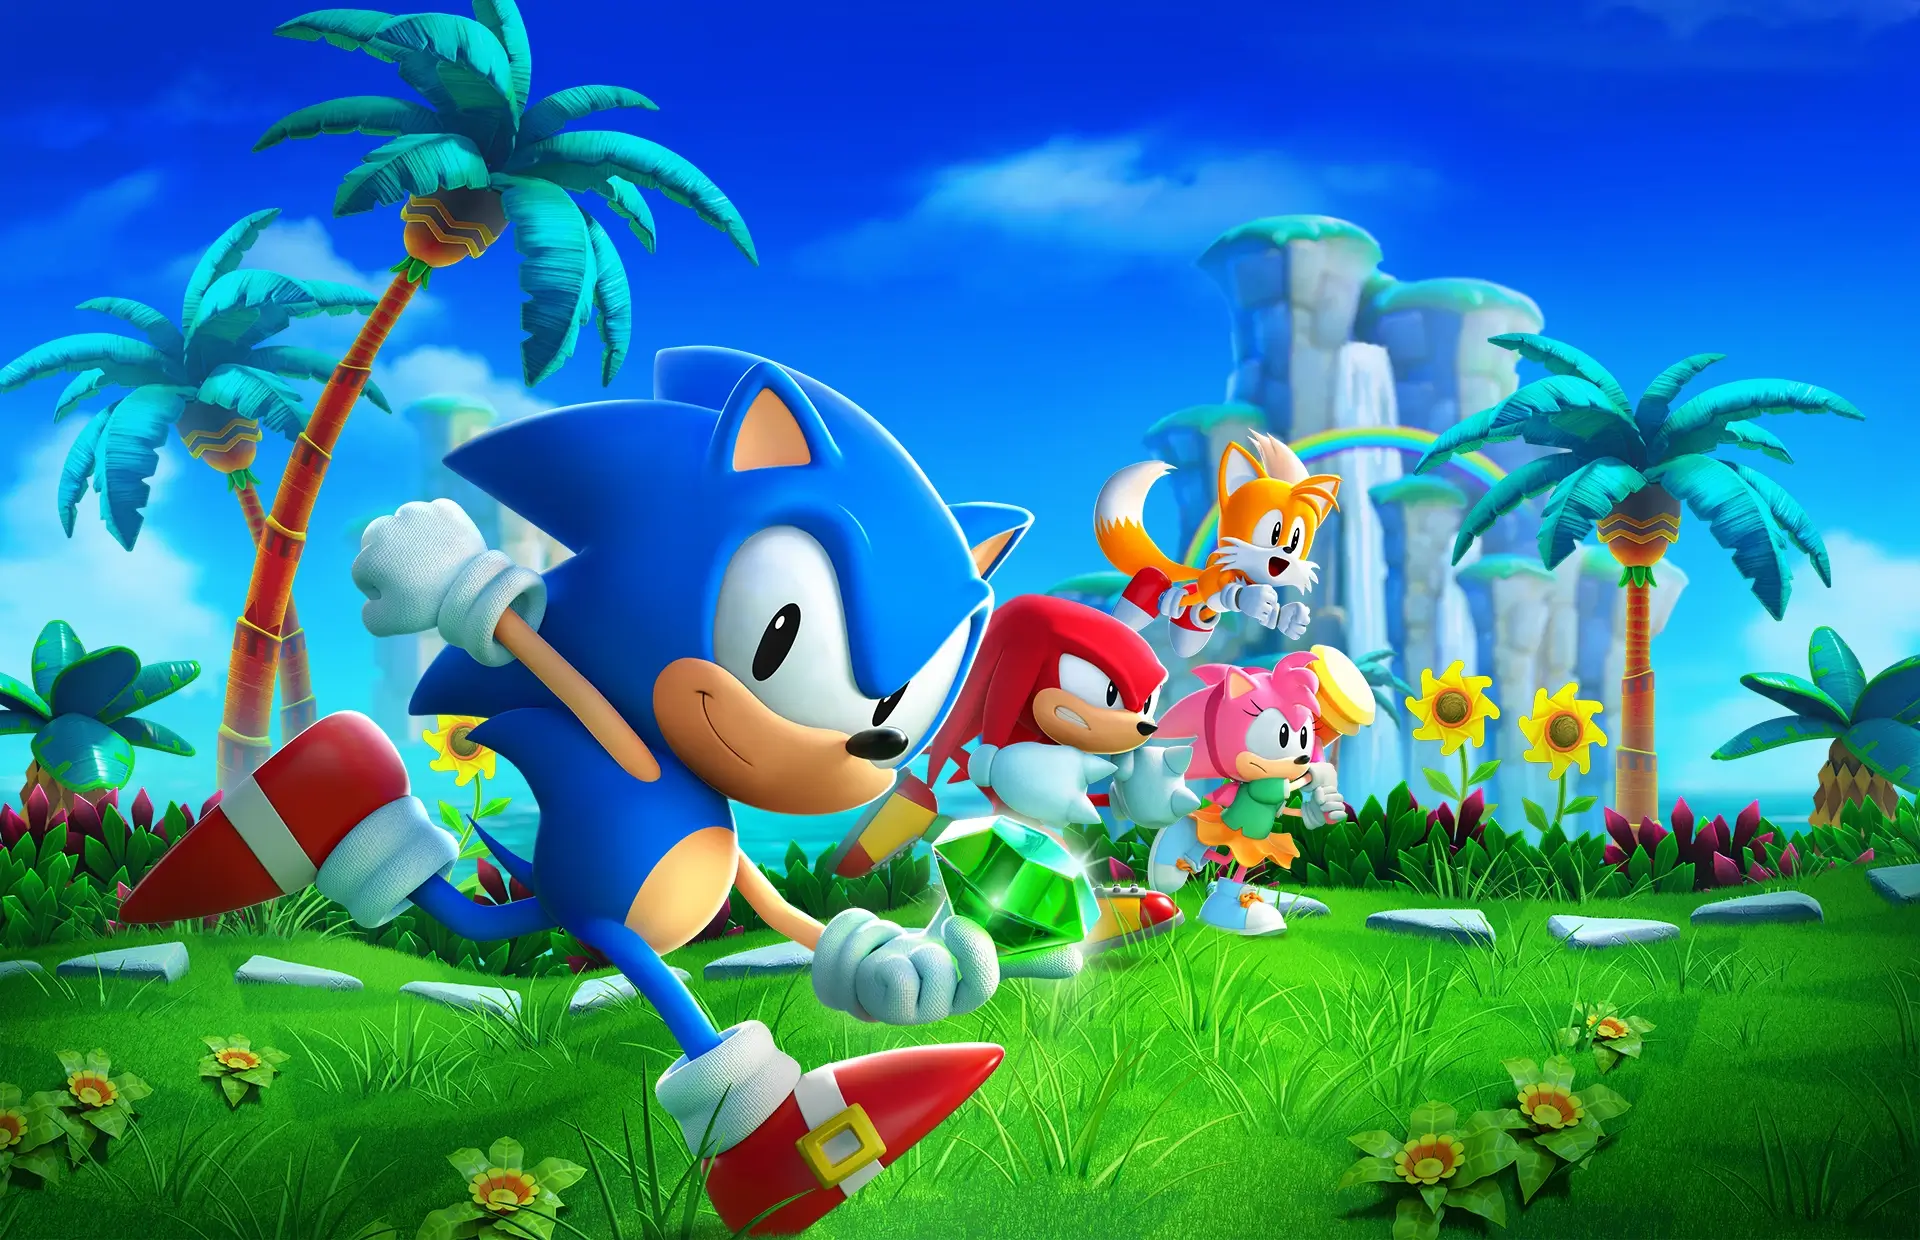 Sonic Mania dev confirms they helped with Sonic Origins Plus